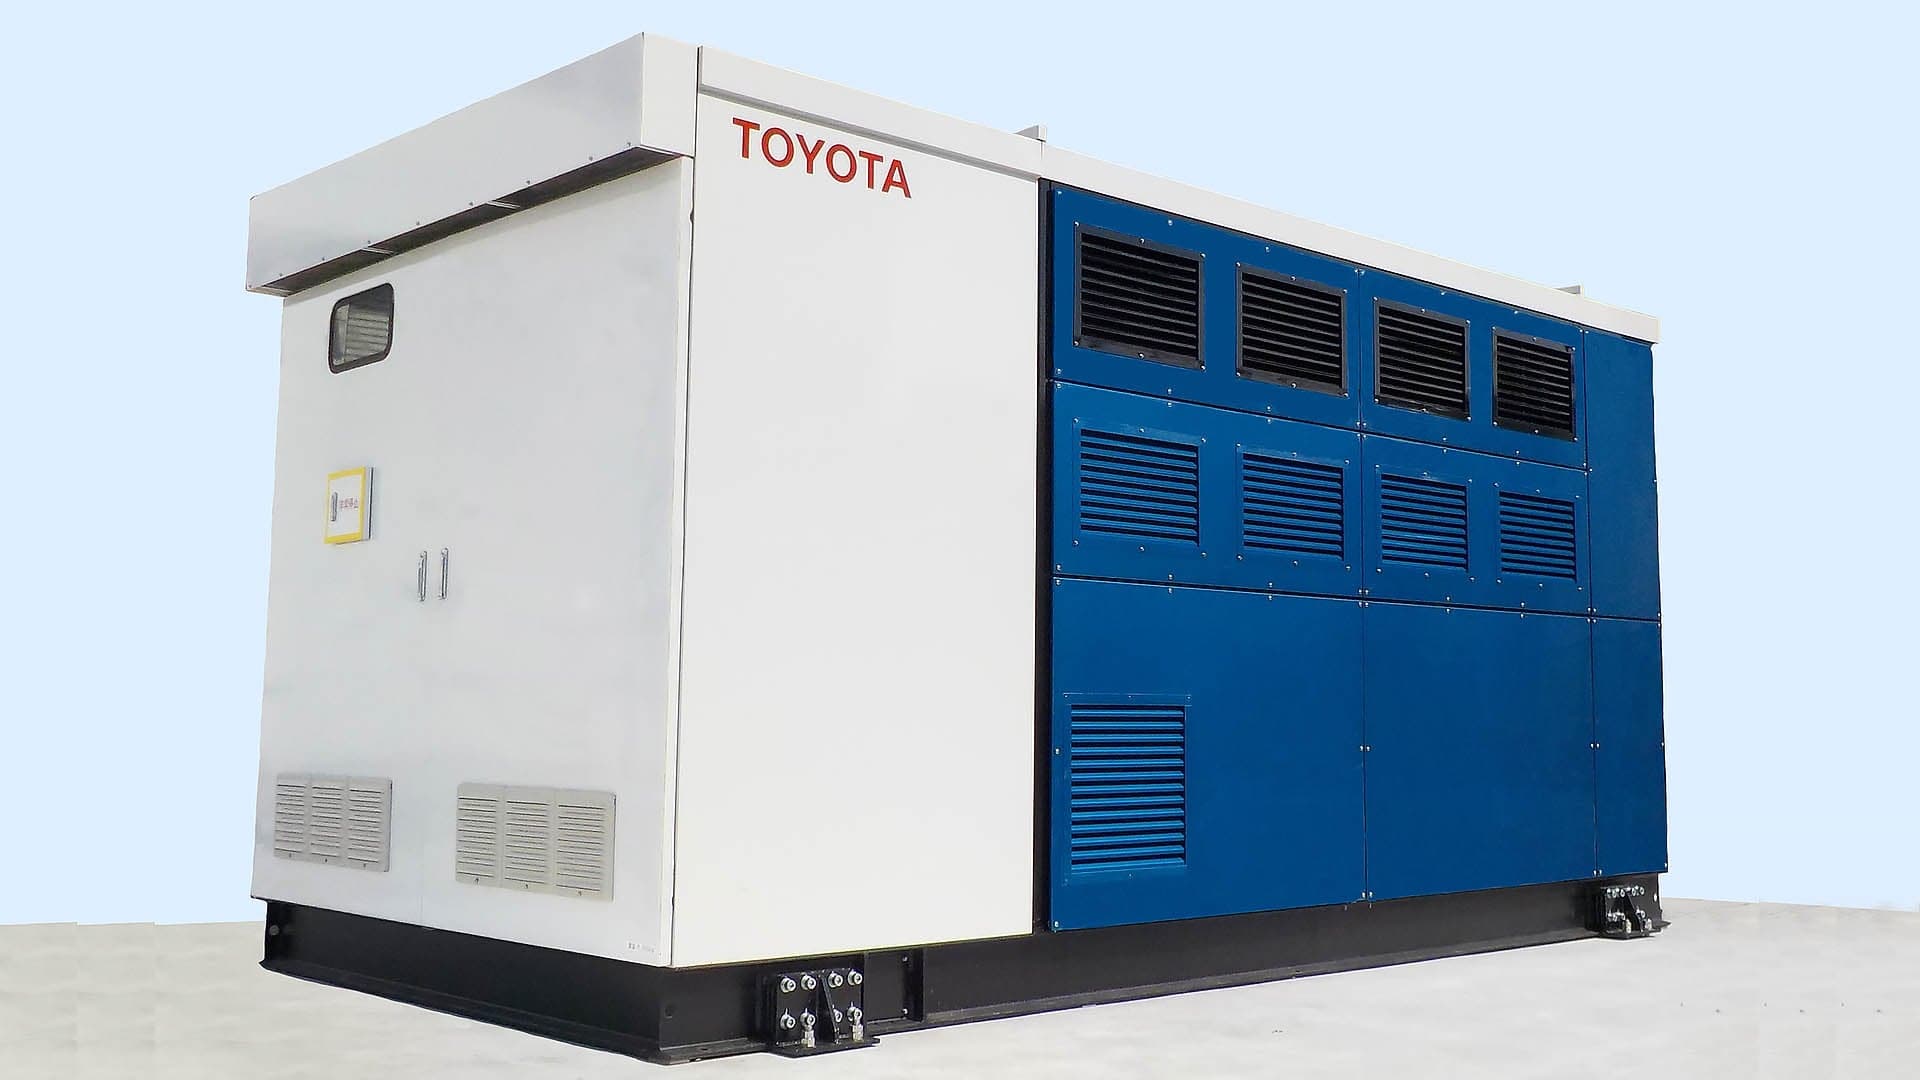 With Toyota’s Hydrogensets, Tesla Soon Can Dump Diesel